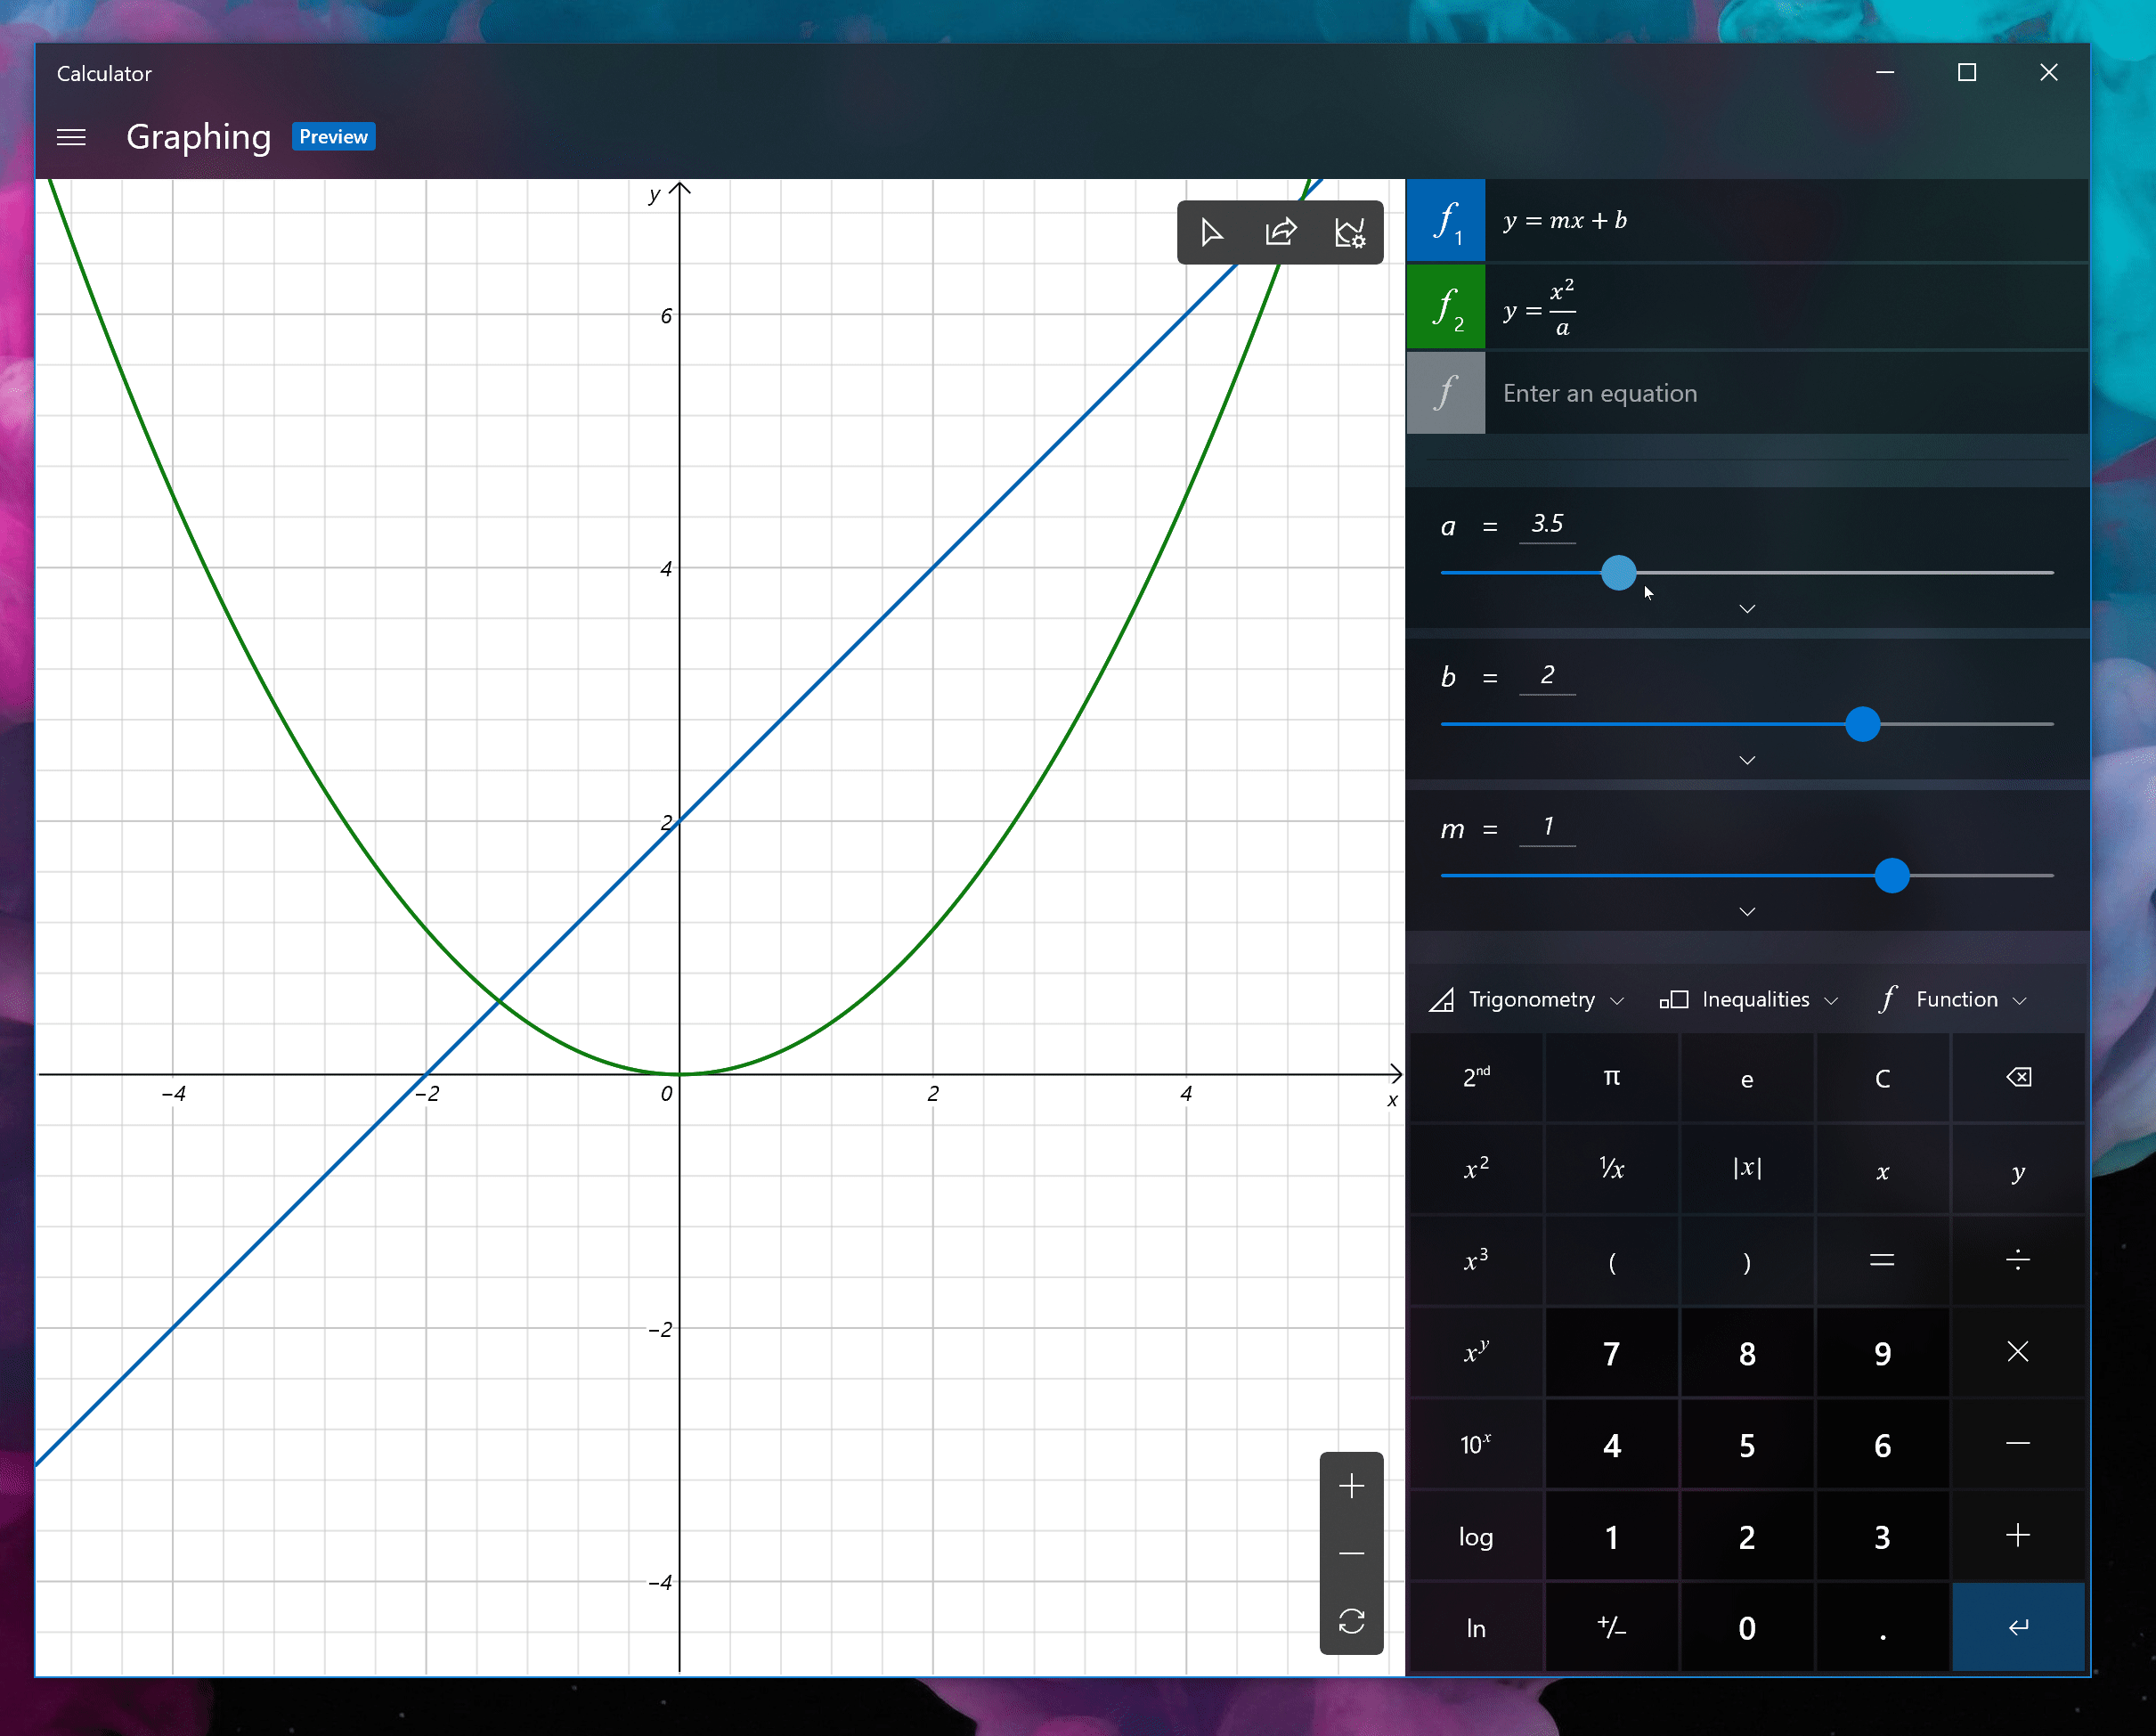 GIF showing how you can use a slider to manipulate equation variables and see changes live on the graph.